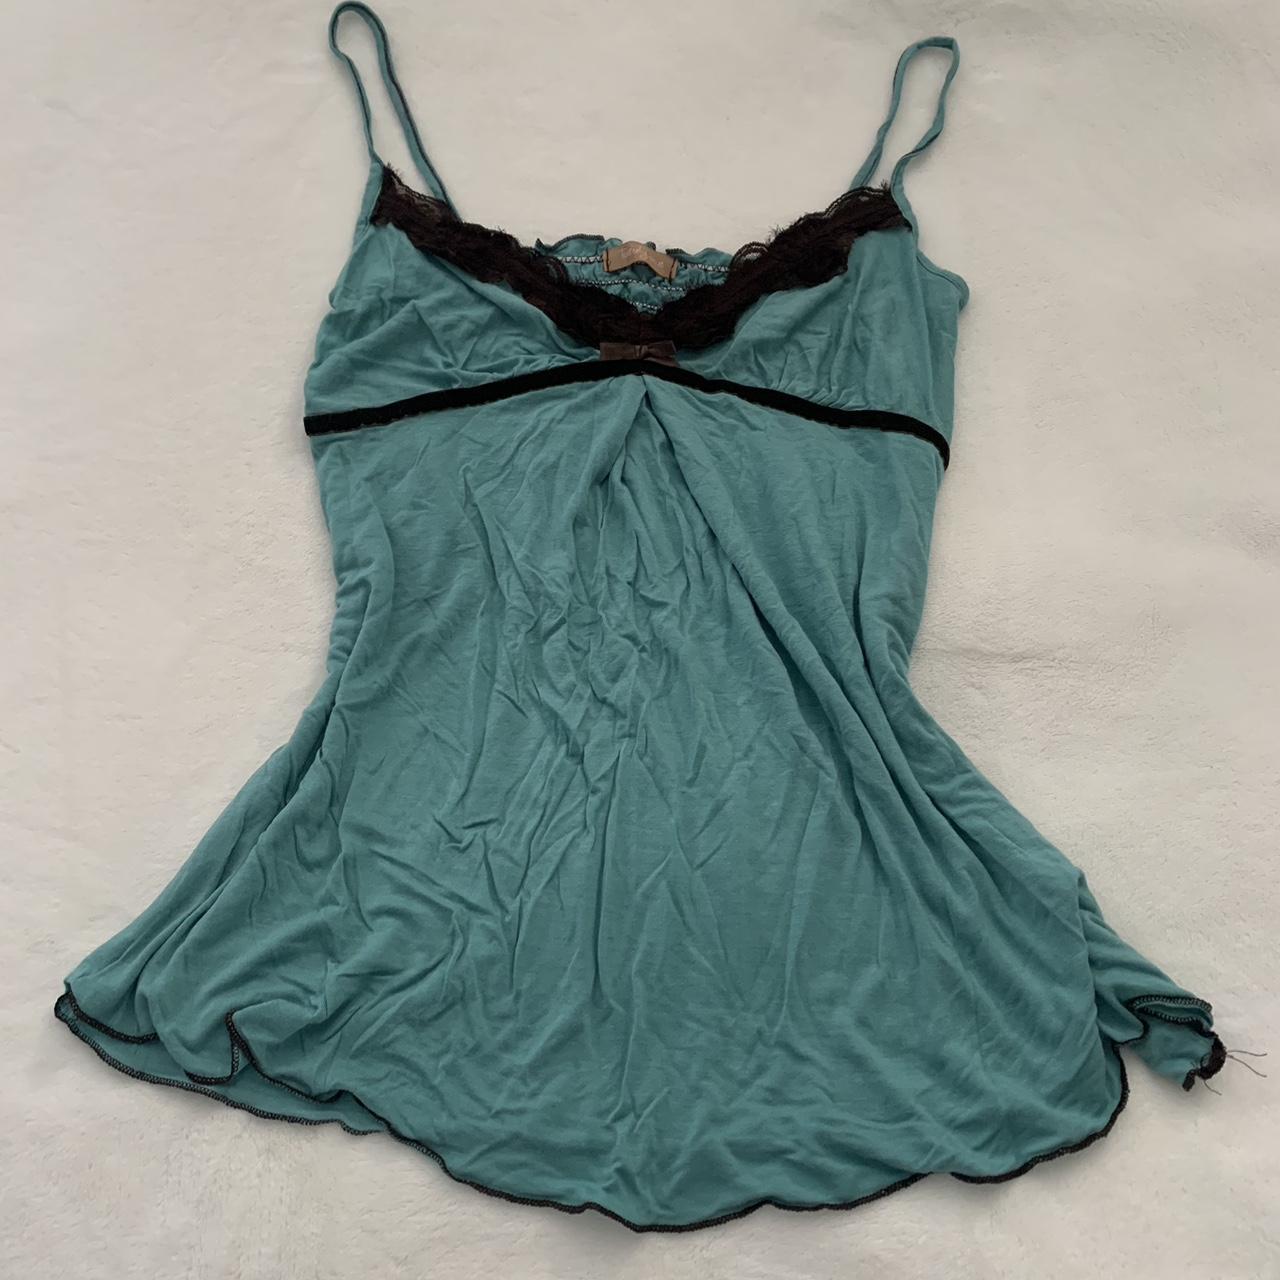 FOR SALE: Amazing 1960s Nightgown! Gives me Alice in - Depop